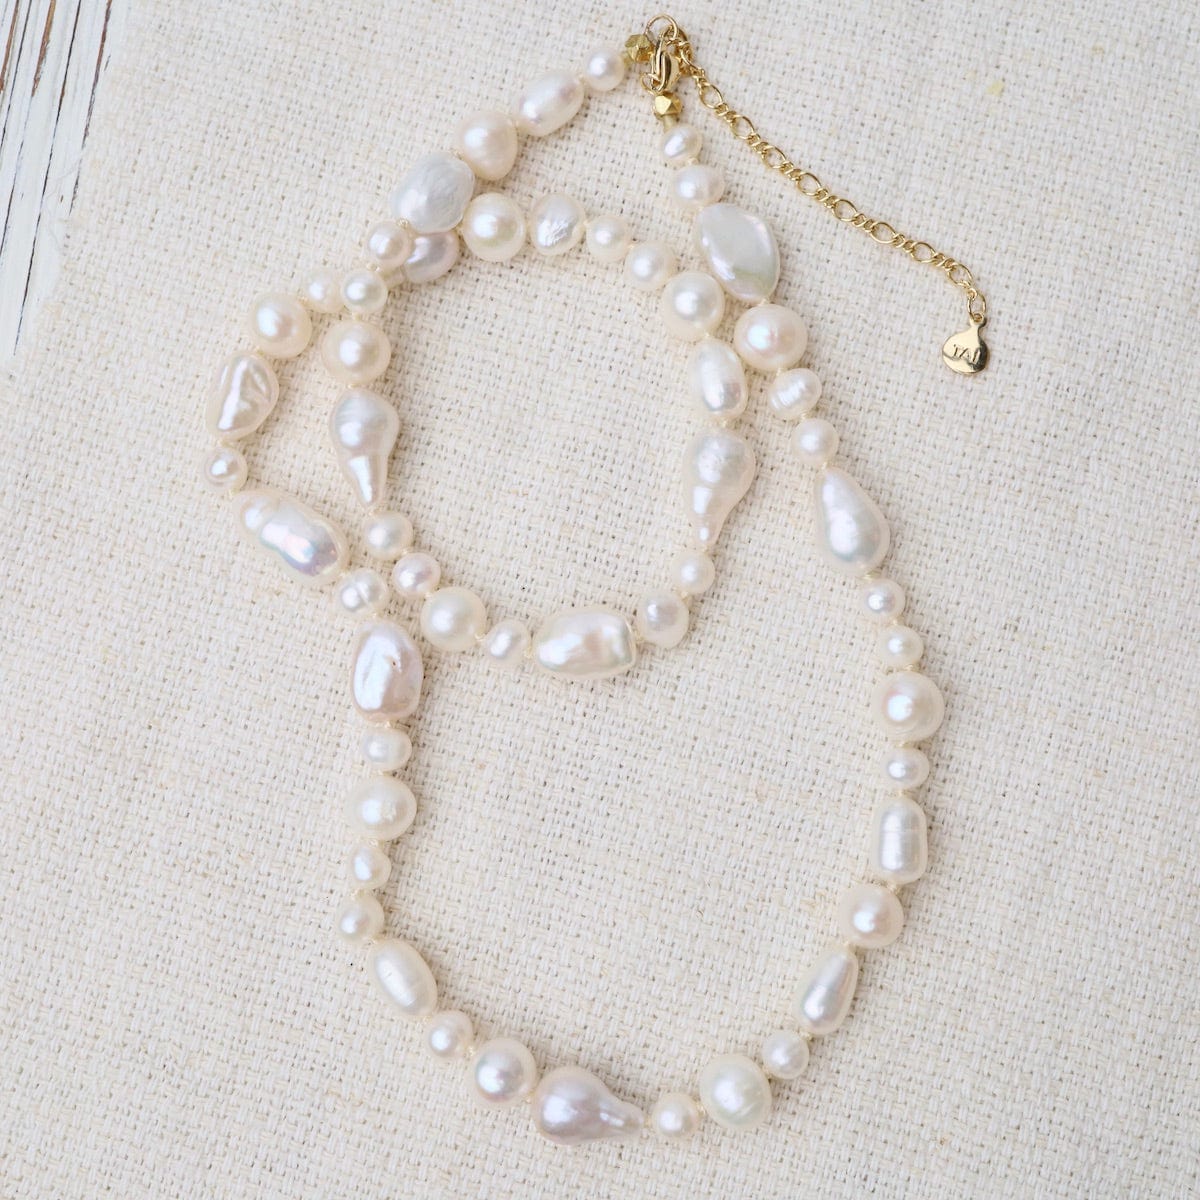 NKL-GPL Knotted Fresh Water Baroque Pearls with Beige Cord